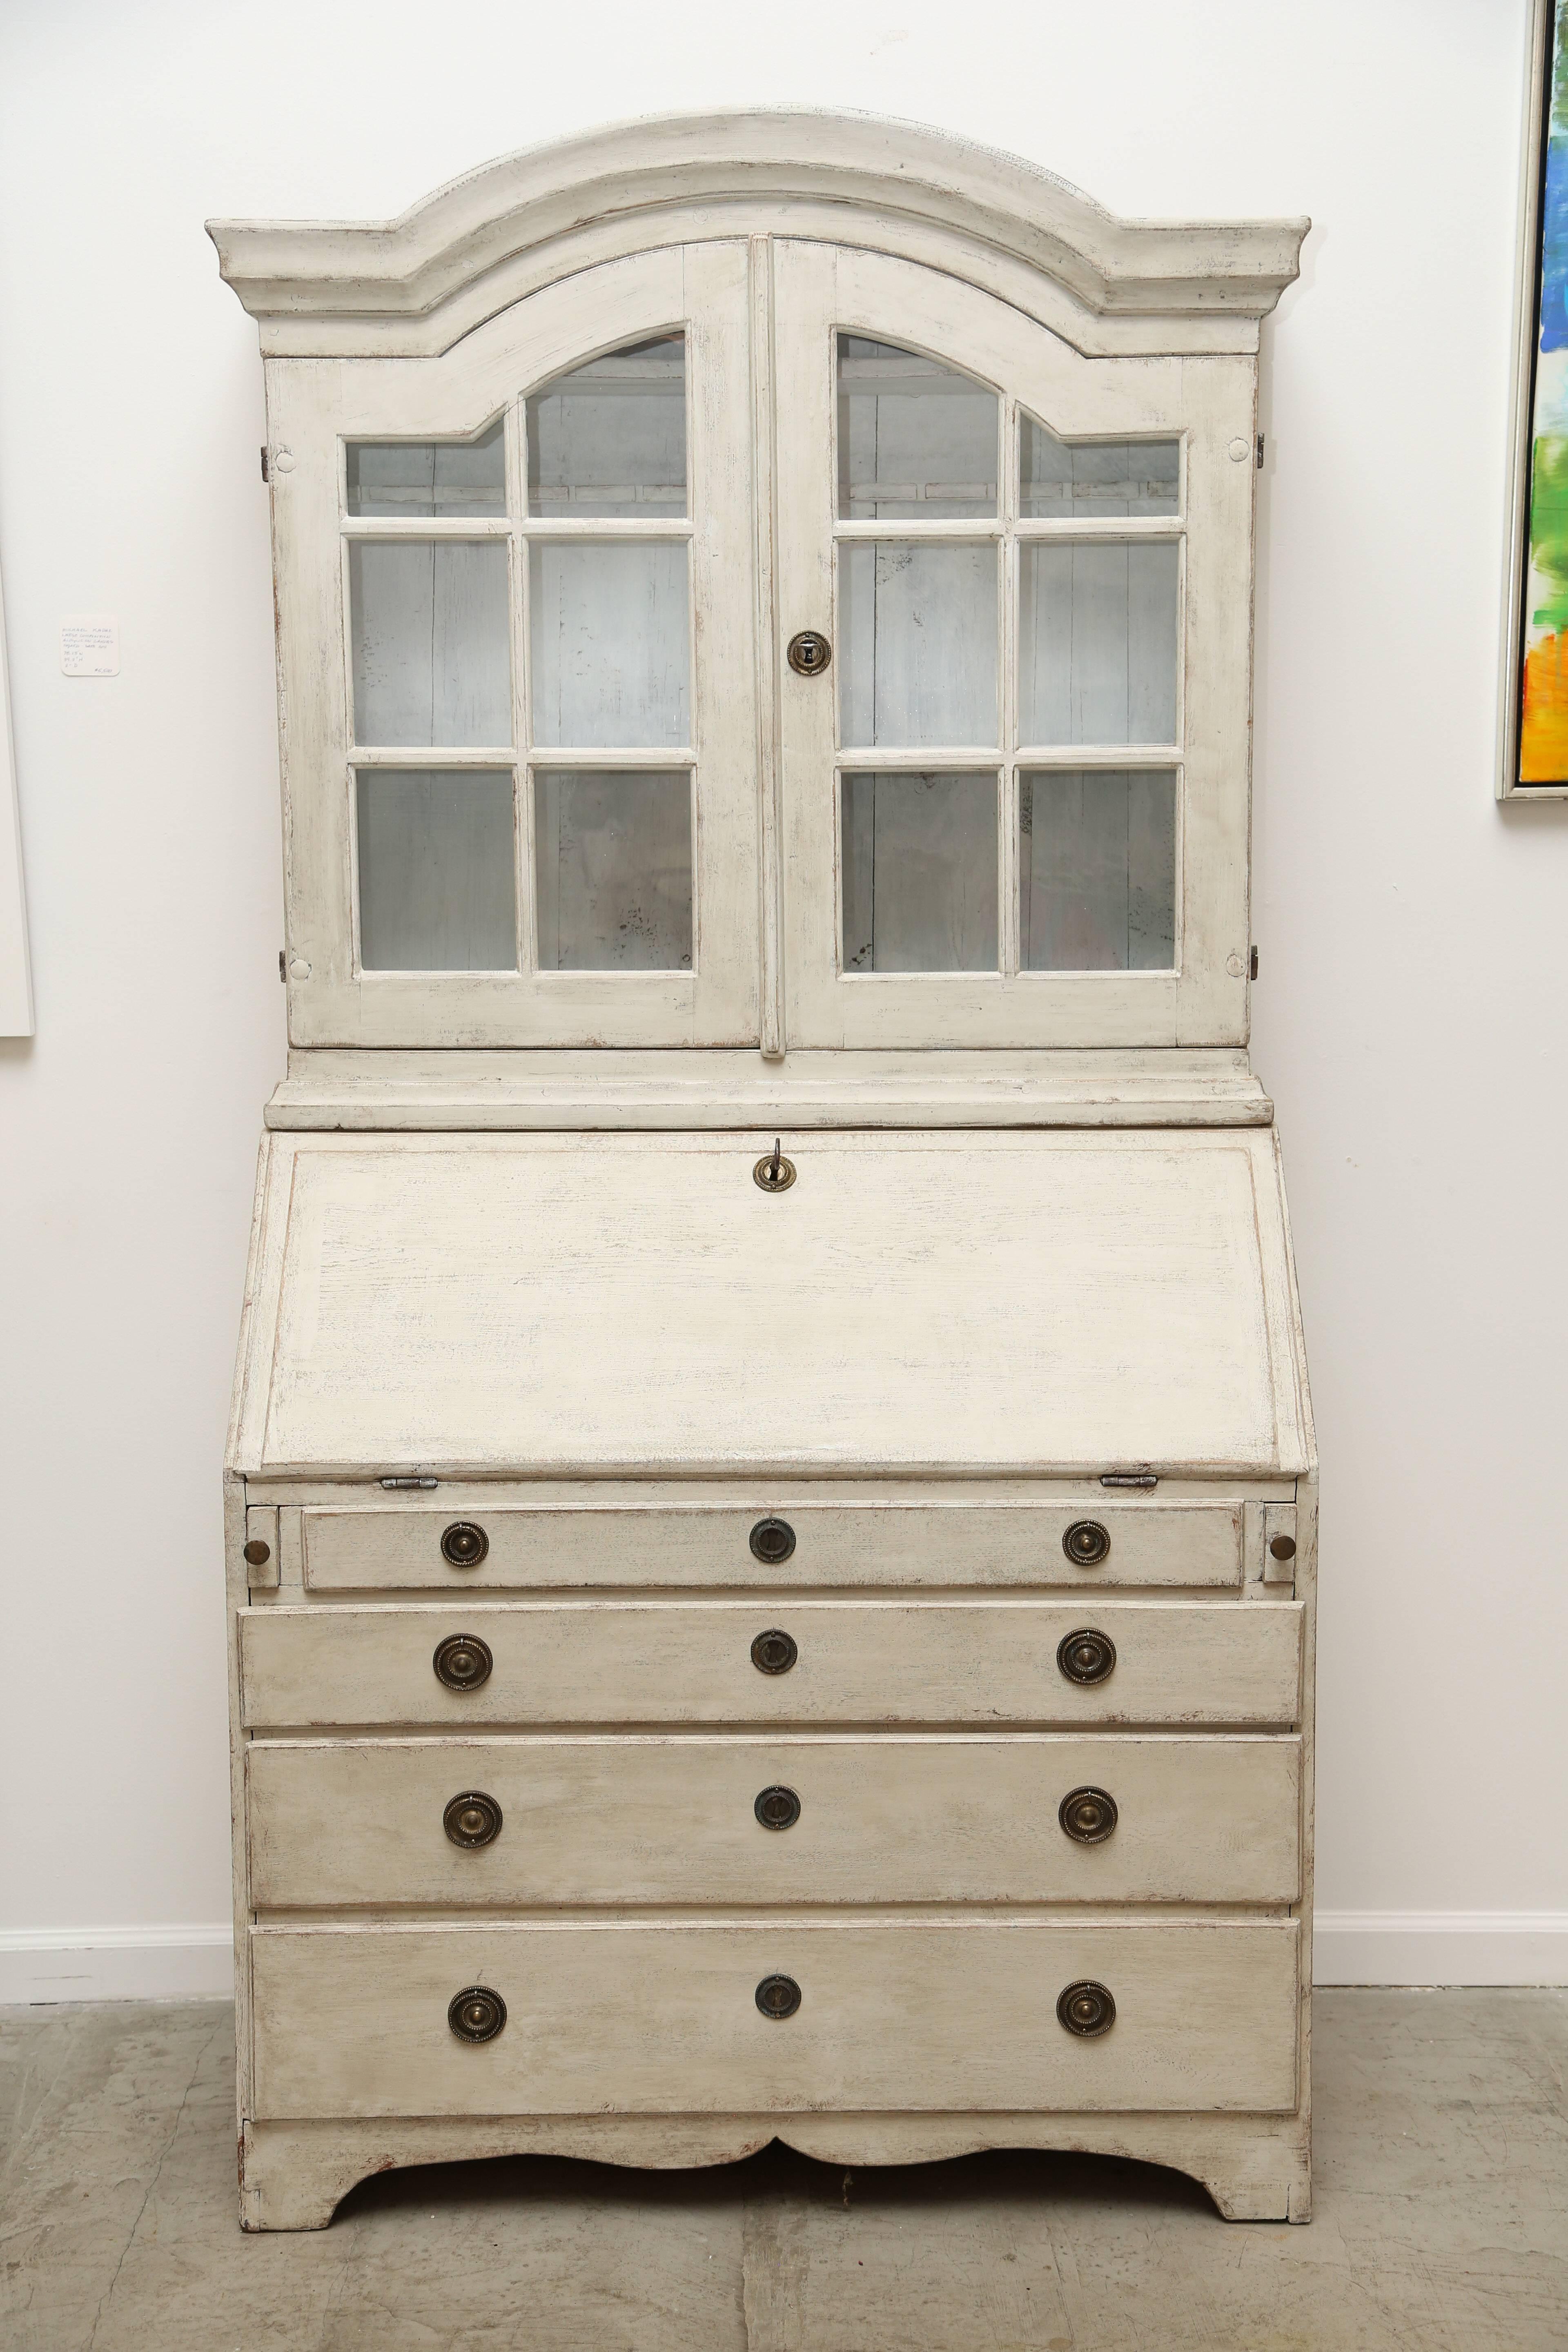 Swedish Baroque Secretary Display Cabinet Painted White, Late 18th Century For Sale 1